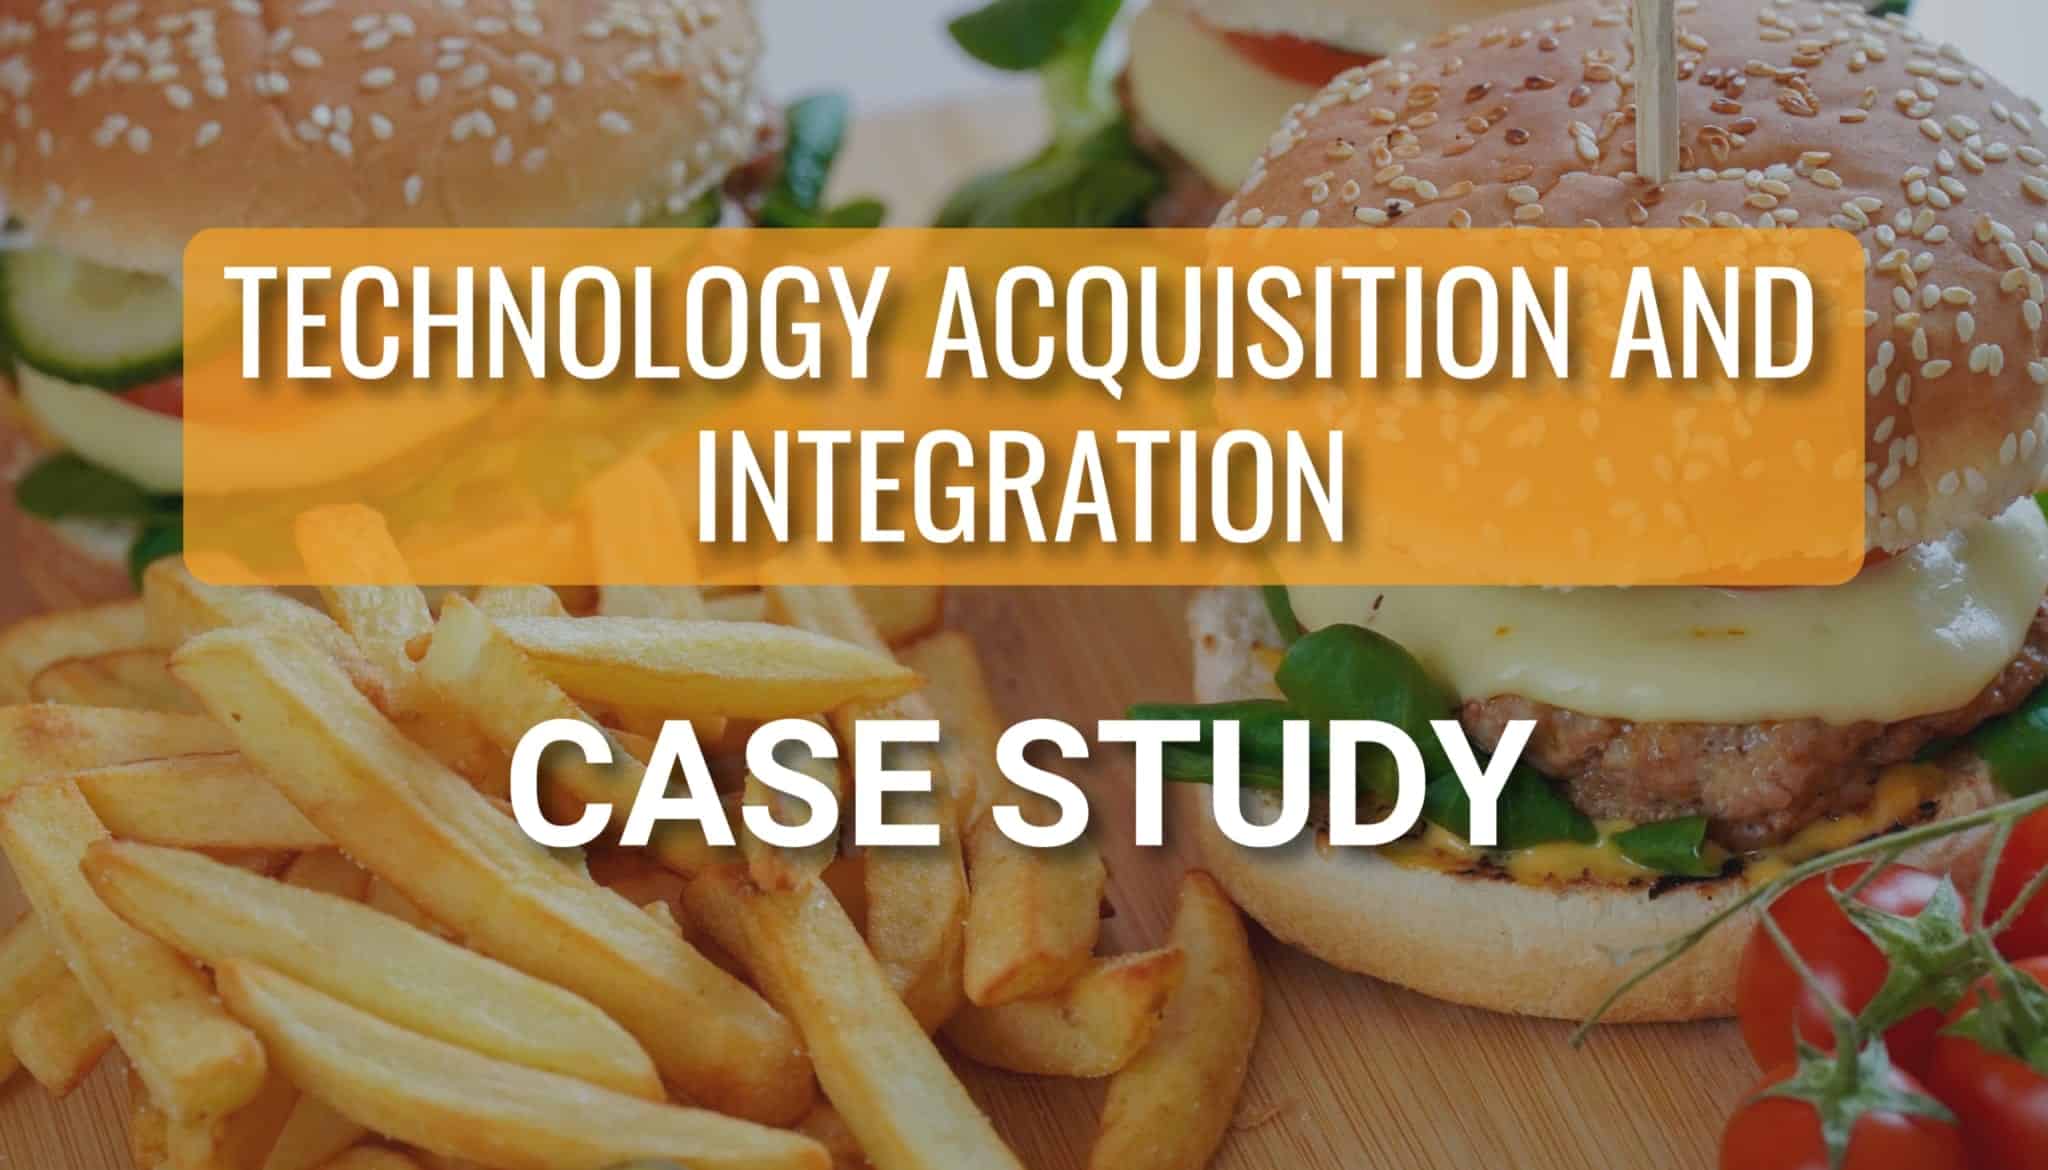 Franchisee Store Acquisition and Technology Integration for QSR